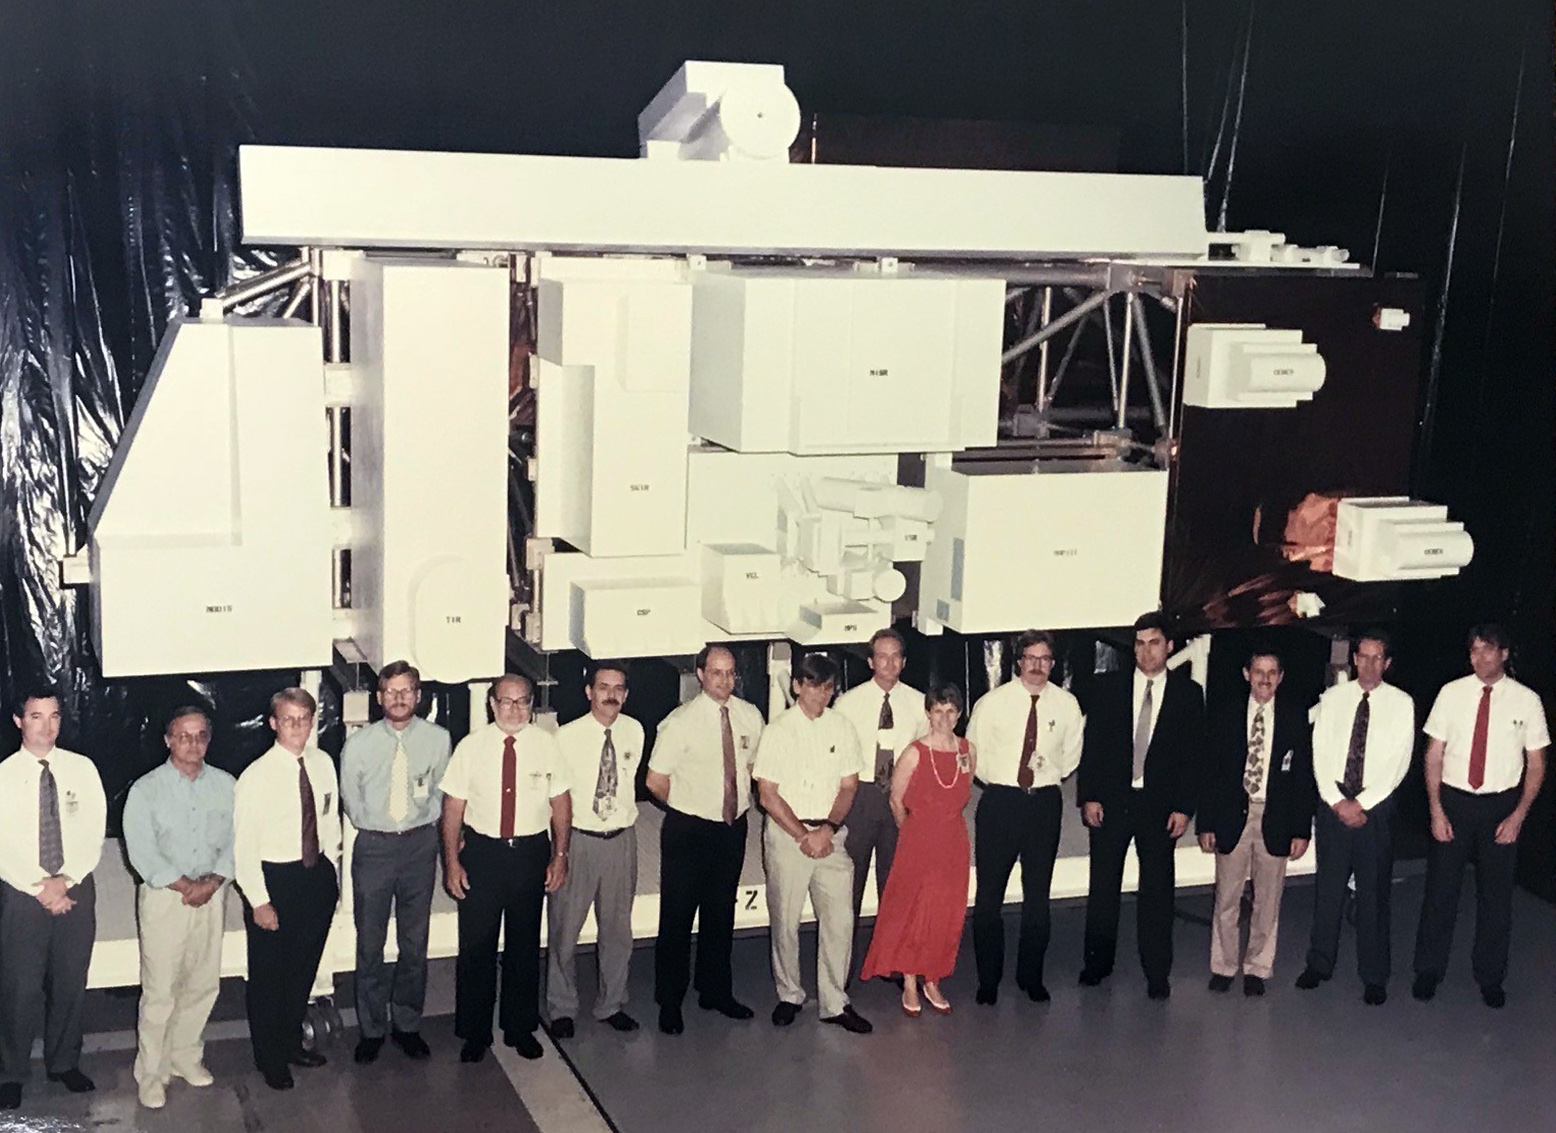 Members of the Terra design team stand in front of a true-to-size model of the satellite in the mid-1990s.